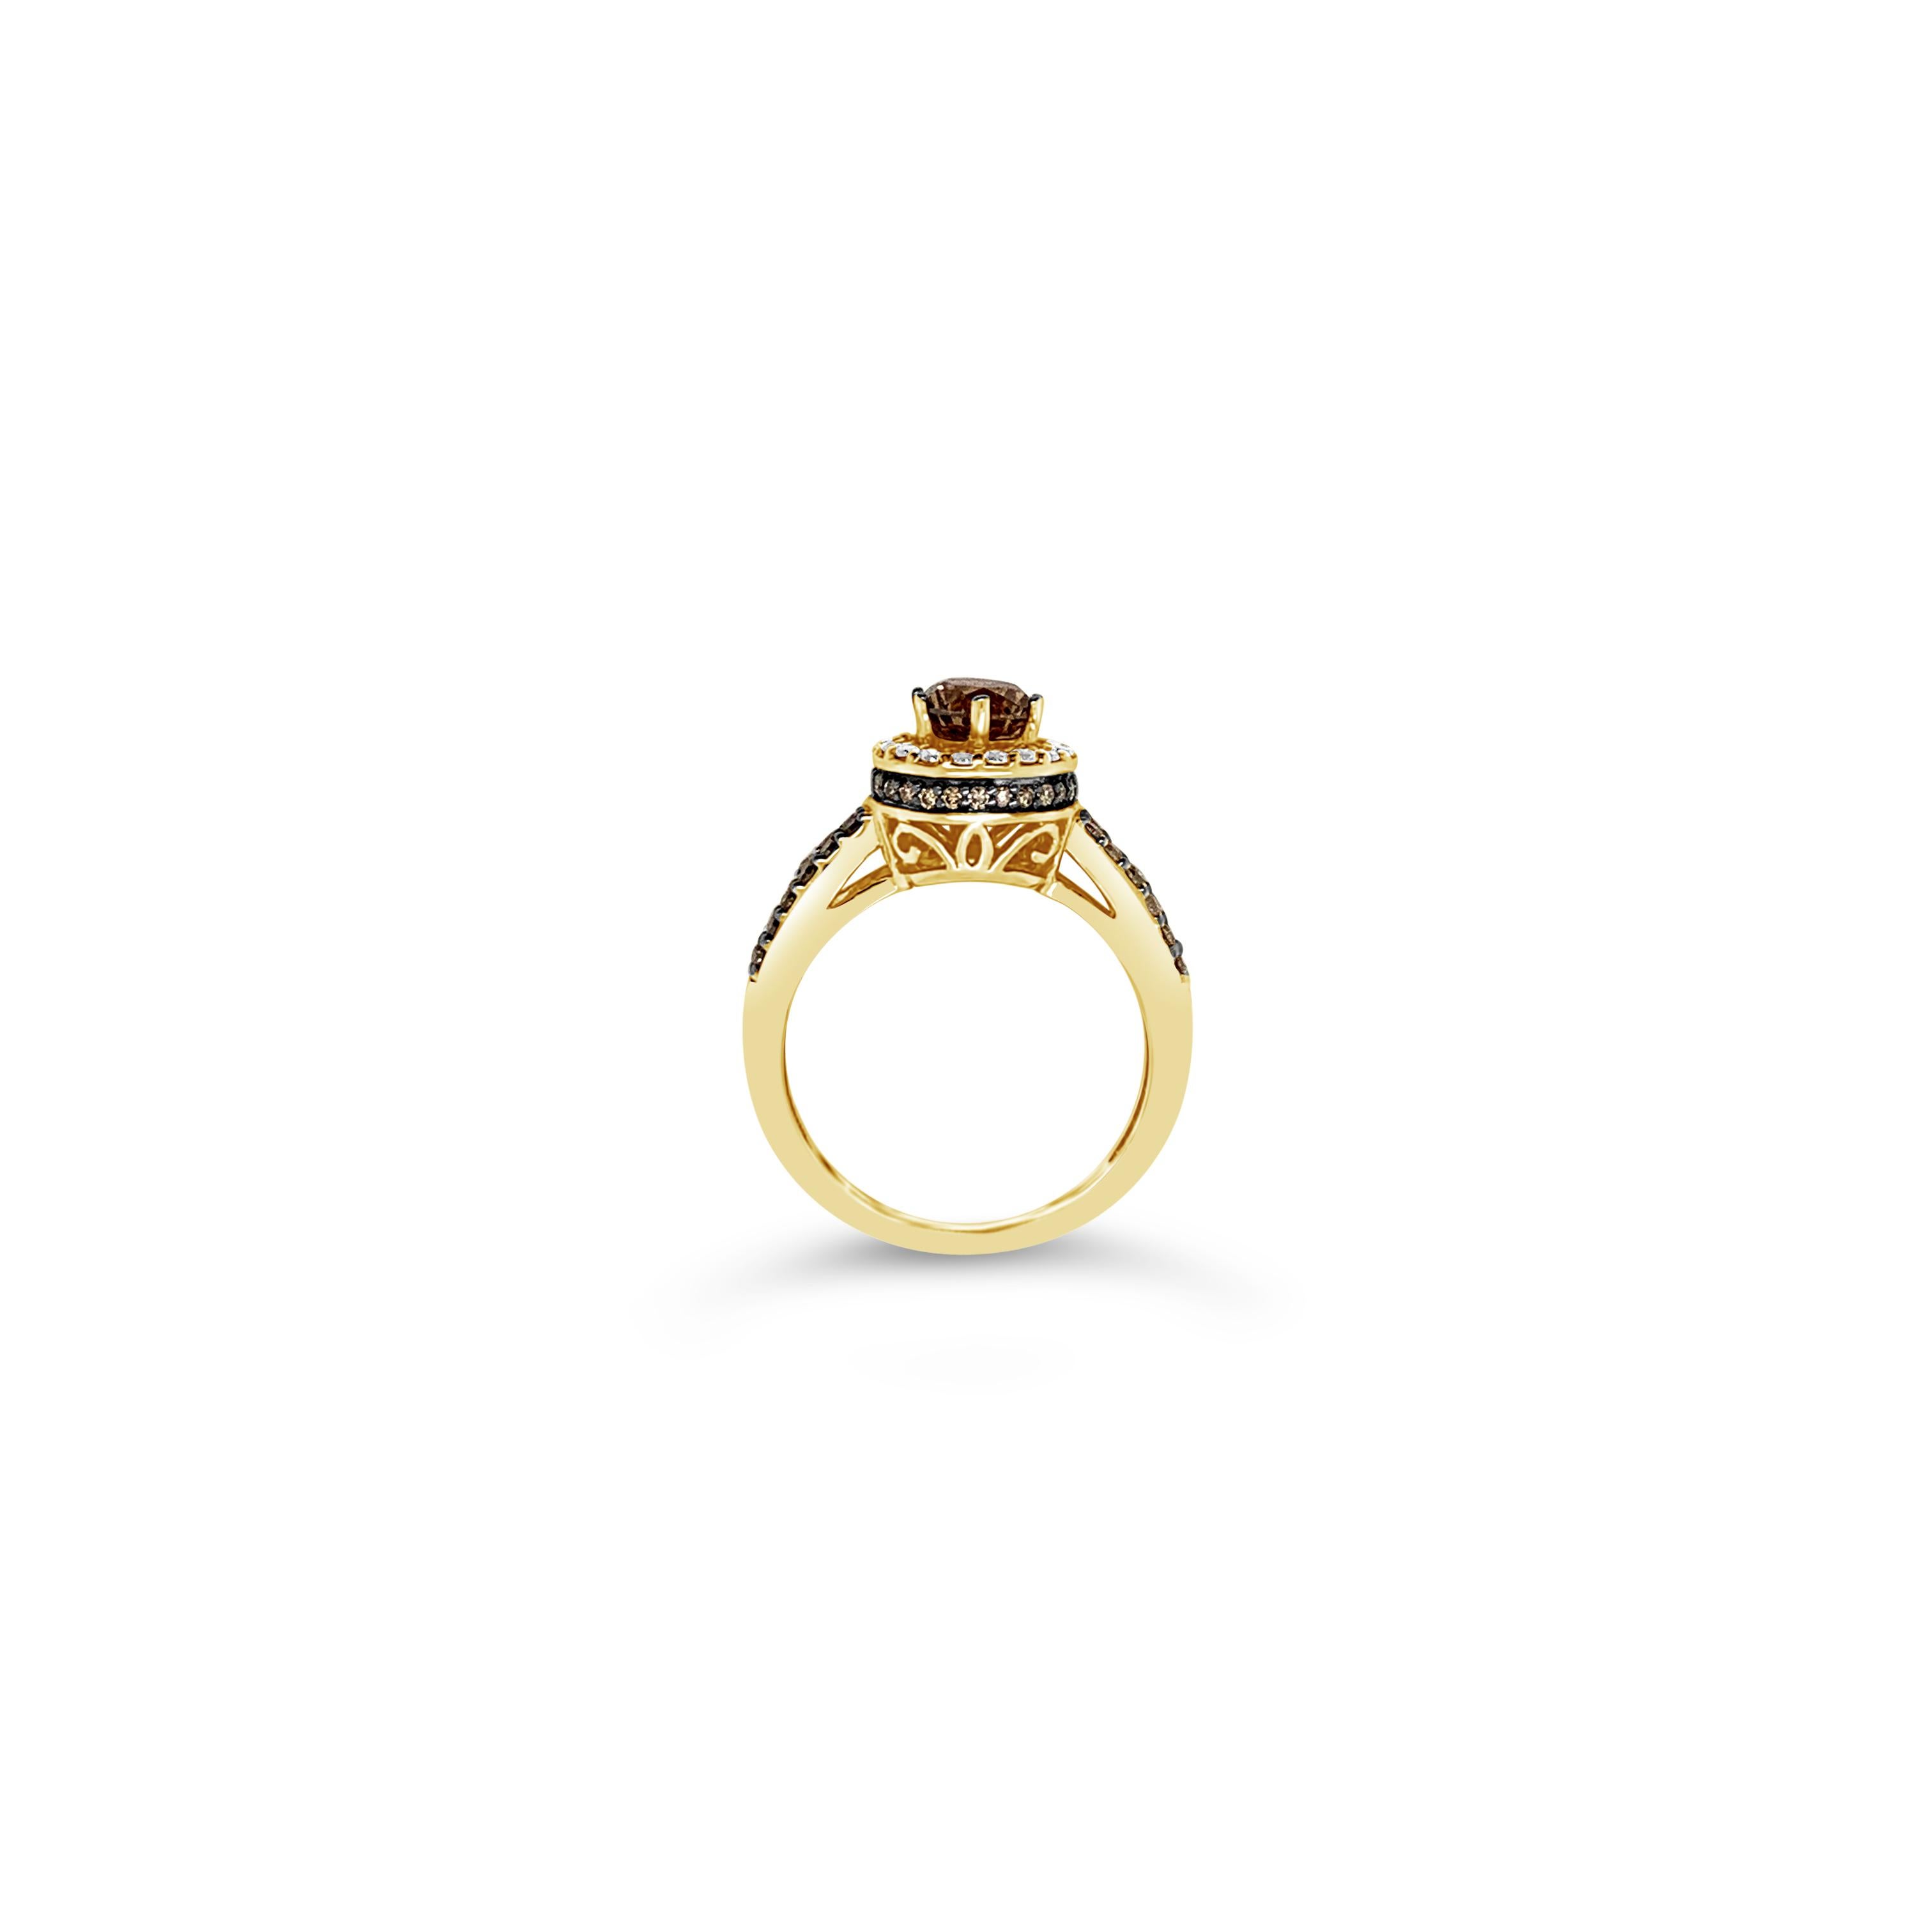 Le Vian® Ring featuring 1 1/8 cts. Chocolate Diamonds®, 1/3 cts. Vanilla Diamonds® set in 14K Honey Gold™

Diamonds Breakdown:
1 1/8 cts Brown Diamonds
1/3 cts White Diamonds

Gems Breakdown:
None

Please feel free to reach out with any